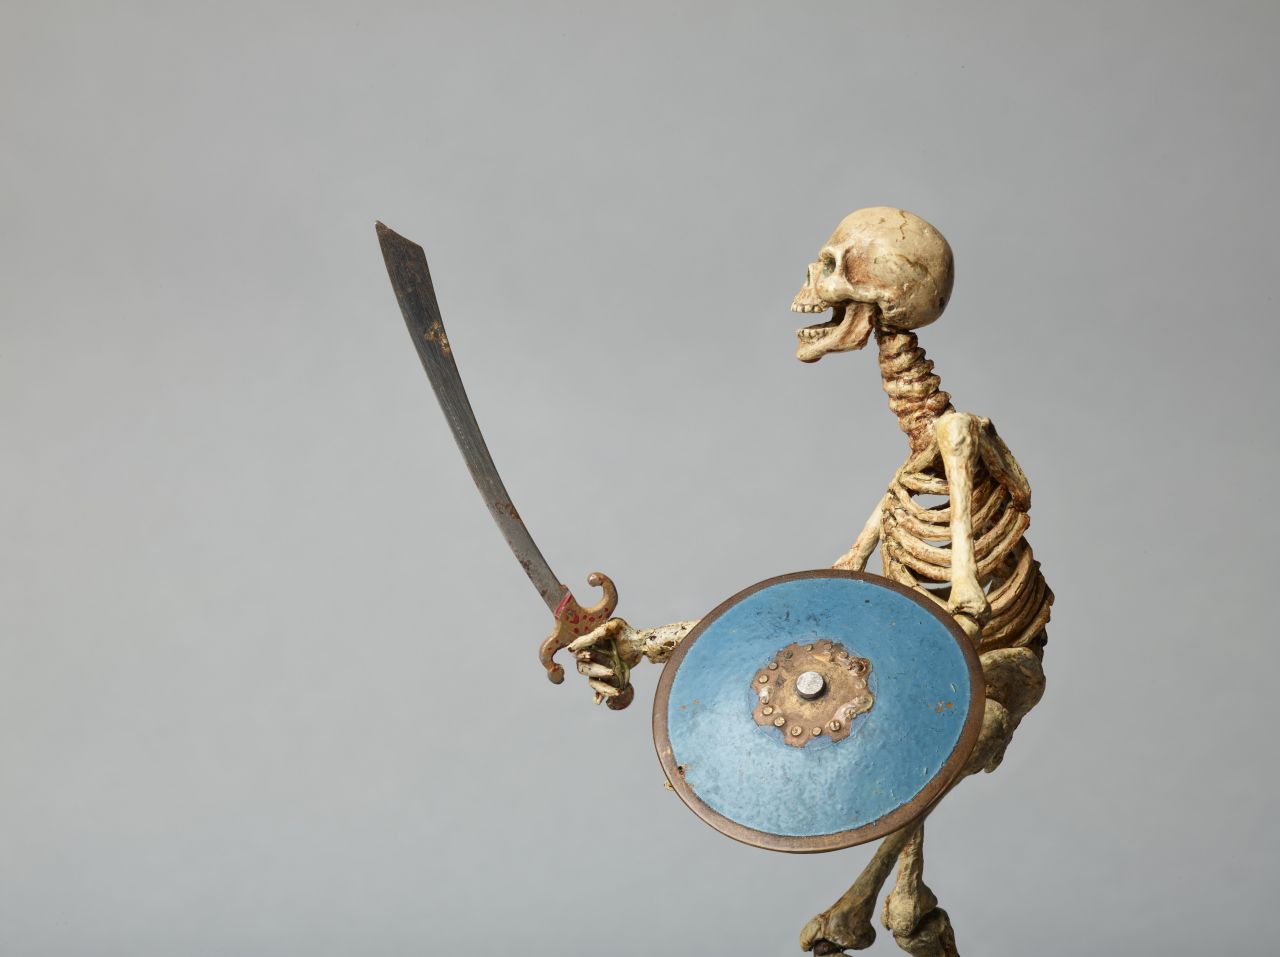 Model of Skeleton from Jason and the Argonauts, c.1961 by Ray Harryhausen (1920-2013). Mounted on wooden base.  Collection: The Ray and Diana Harryhausen Foundation (Charity No. SC001419) © The Ray and Diana Harryhausen Foundation Photography: Sam Drake (National Galleries of Scotland)